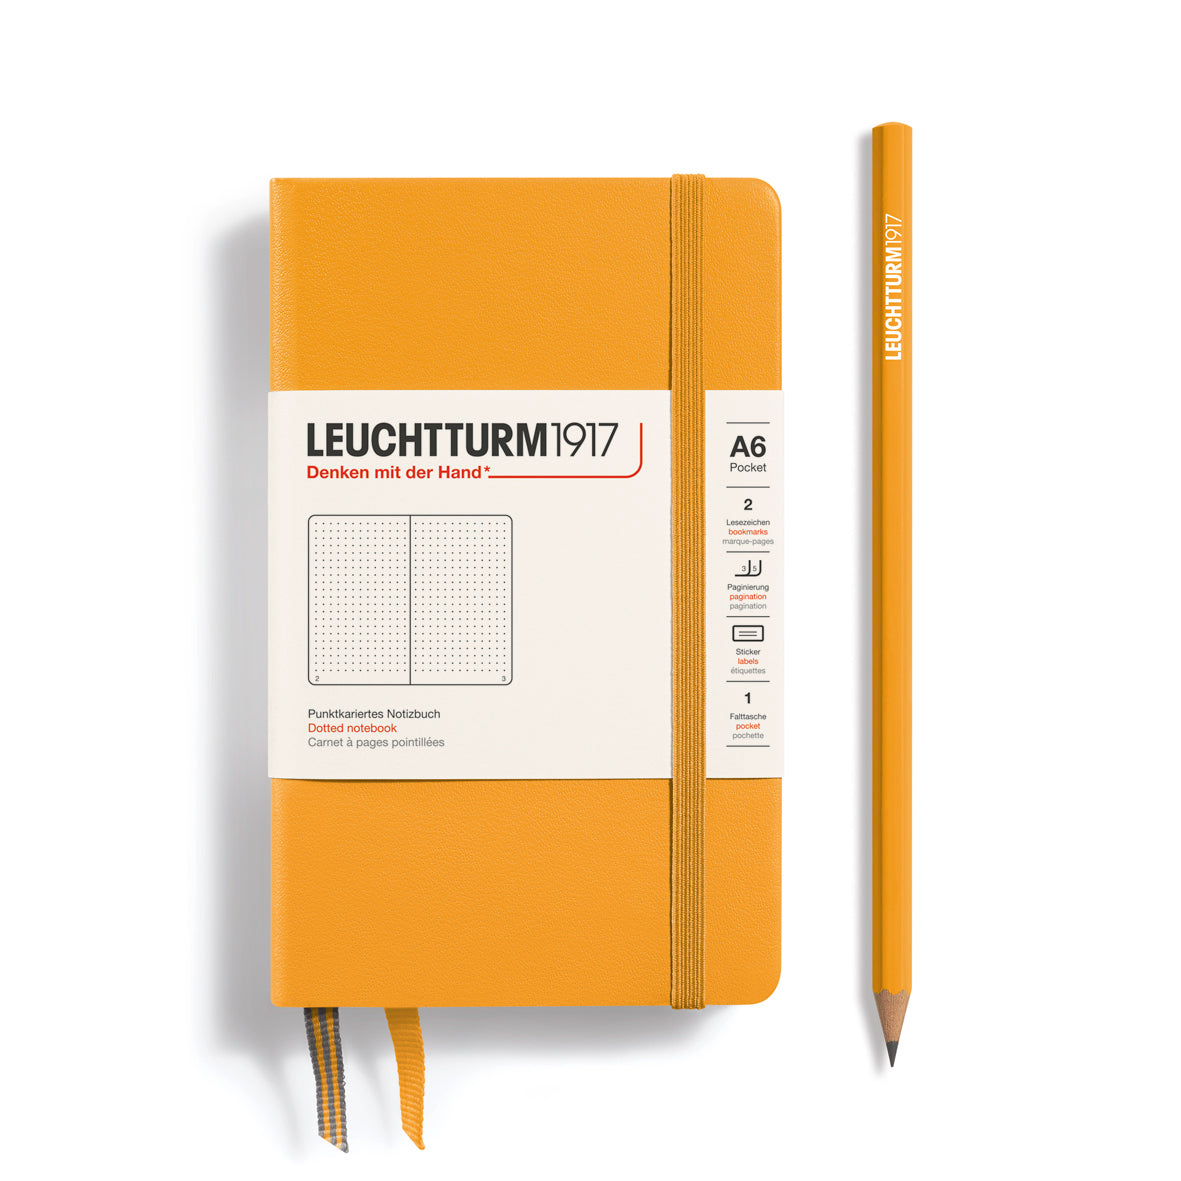 Leuchtturm1917 Notebook A6 Pocket Hardcover in rising sun orange and dotted ruling from penny black